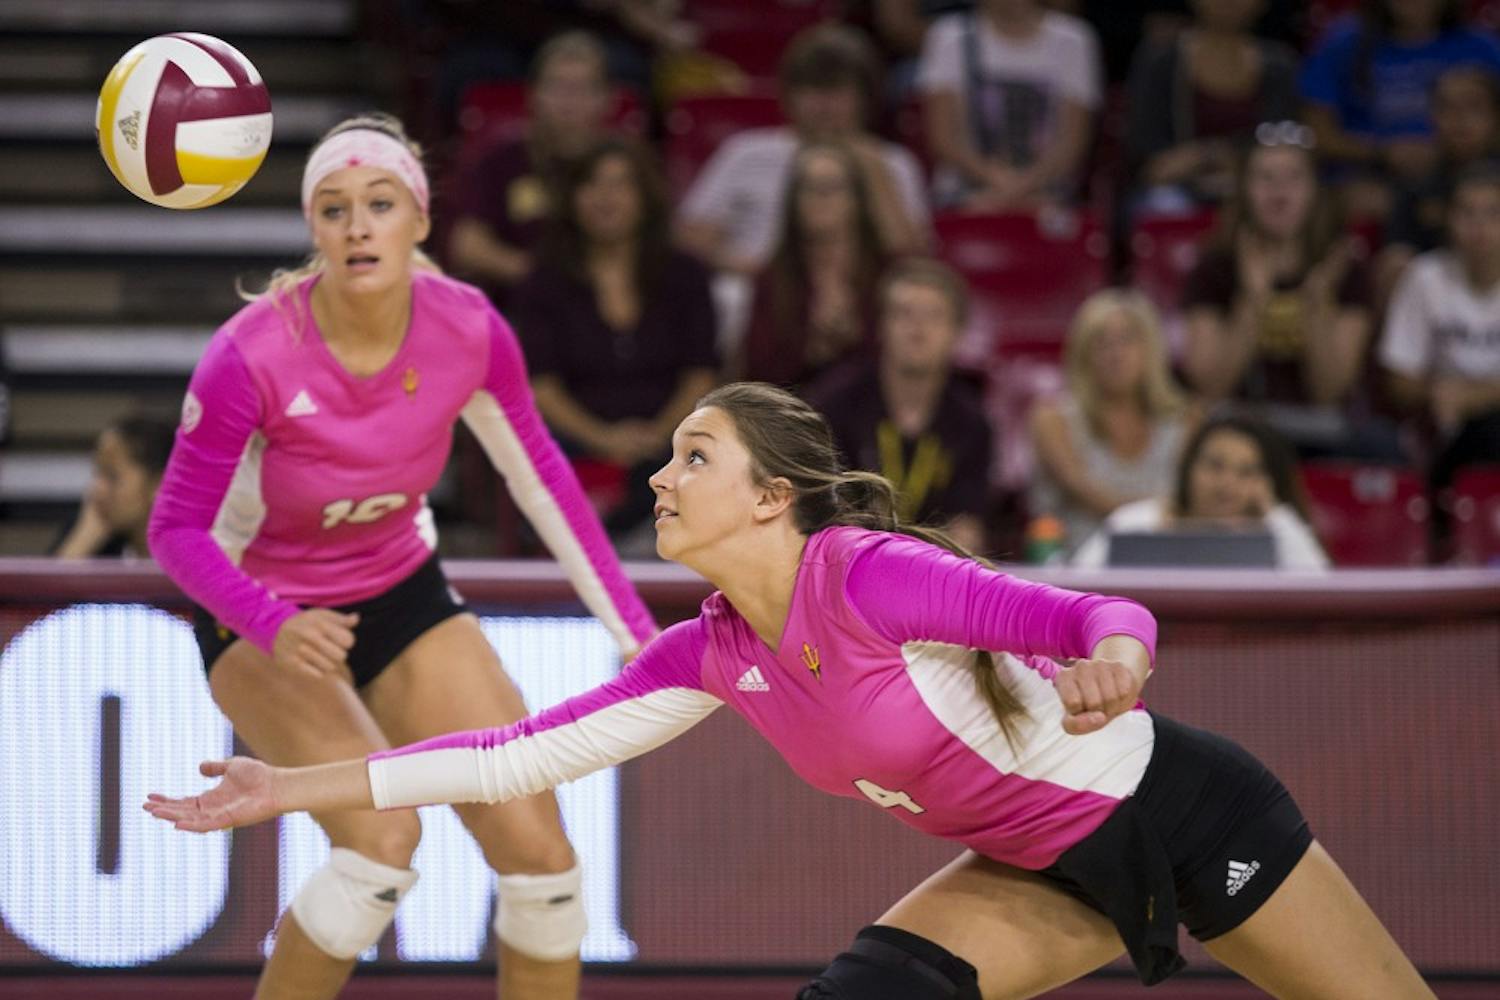 The ASU volleyball team competes against the visiting Stanford Cardinal at Wells Fargo Arena in Tempe on Friday, Oct. 2, 2015.